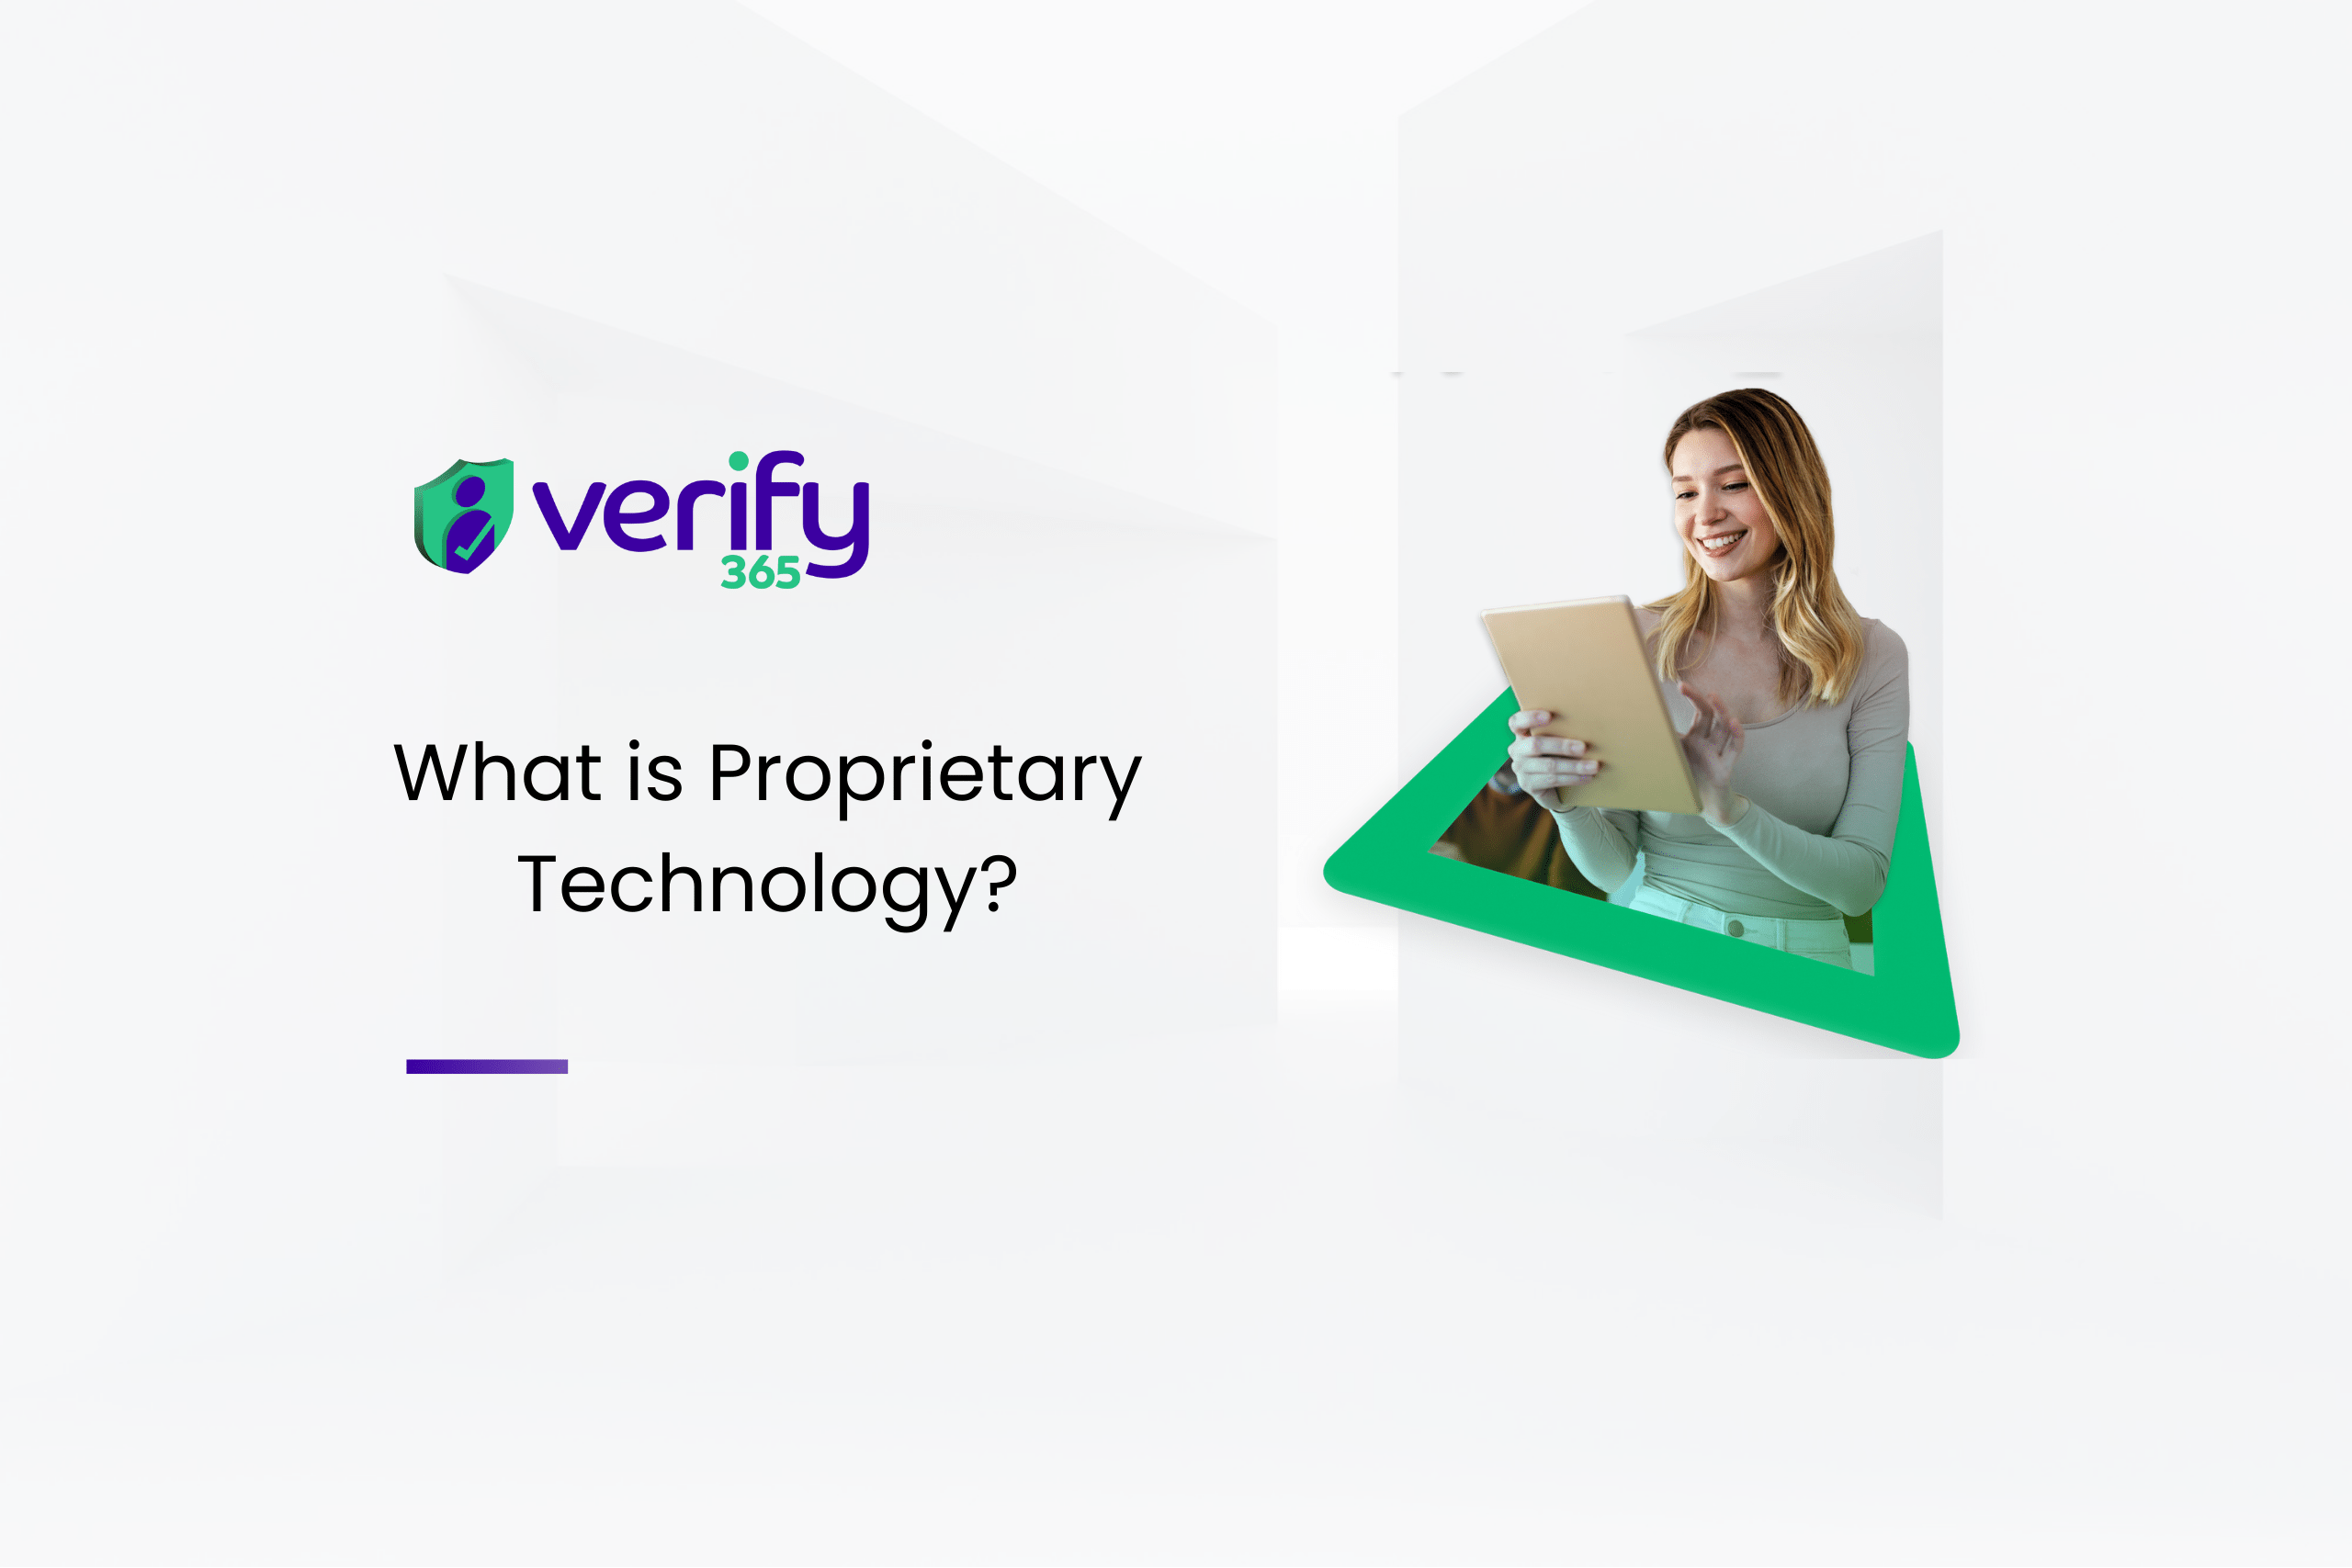 What is proprietary technology?